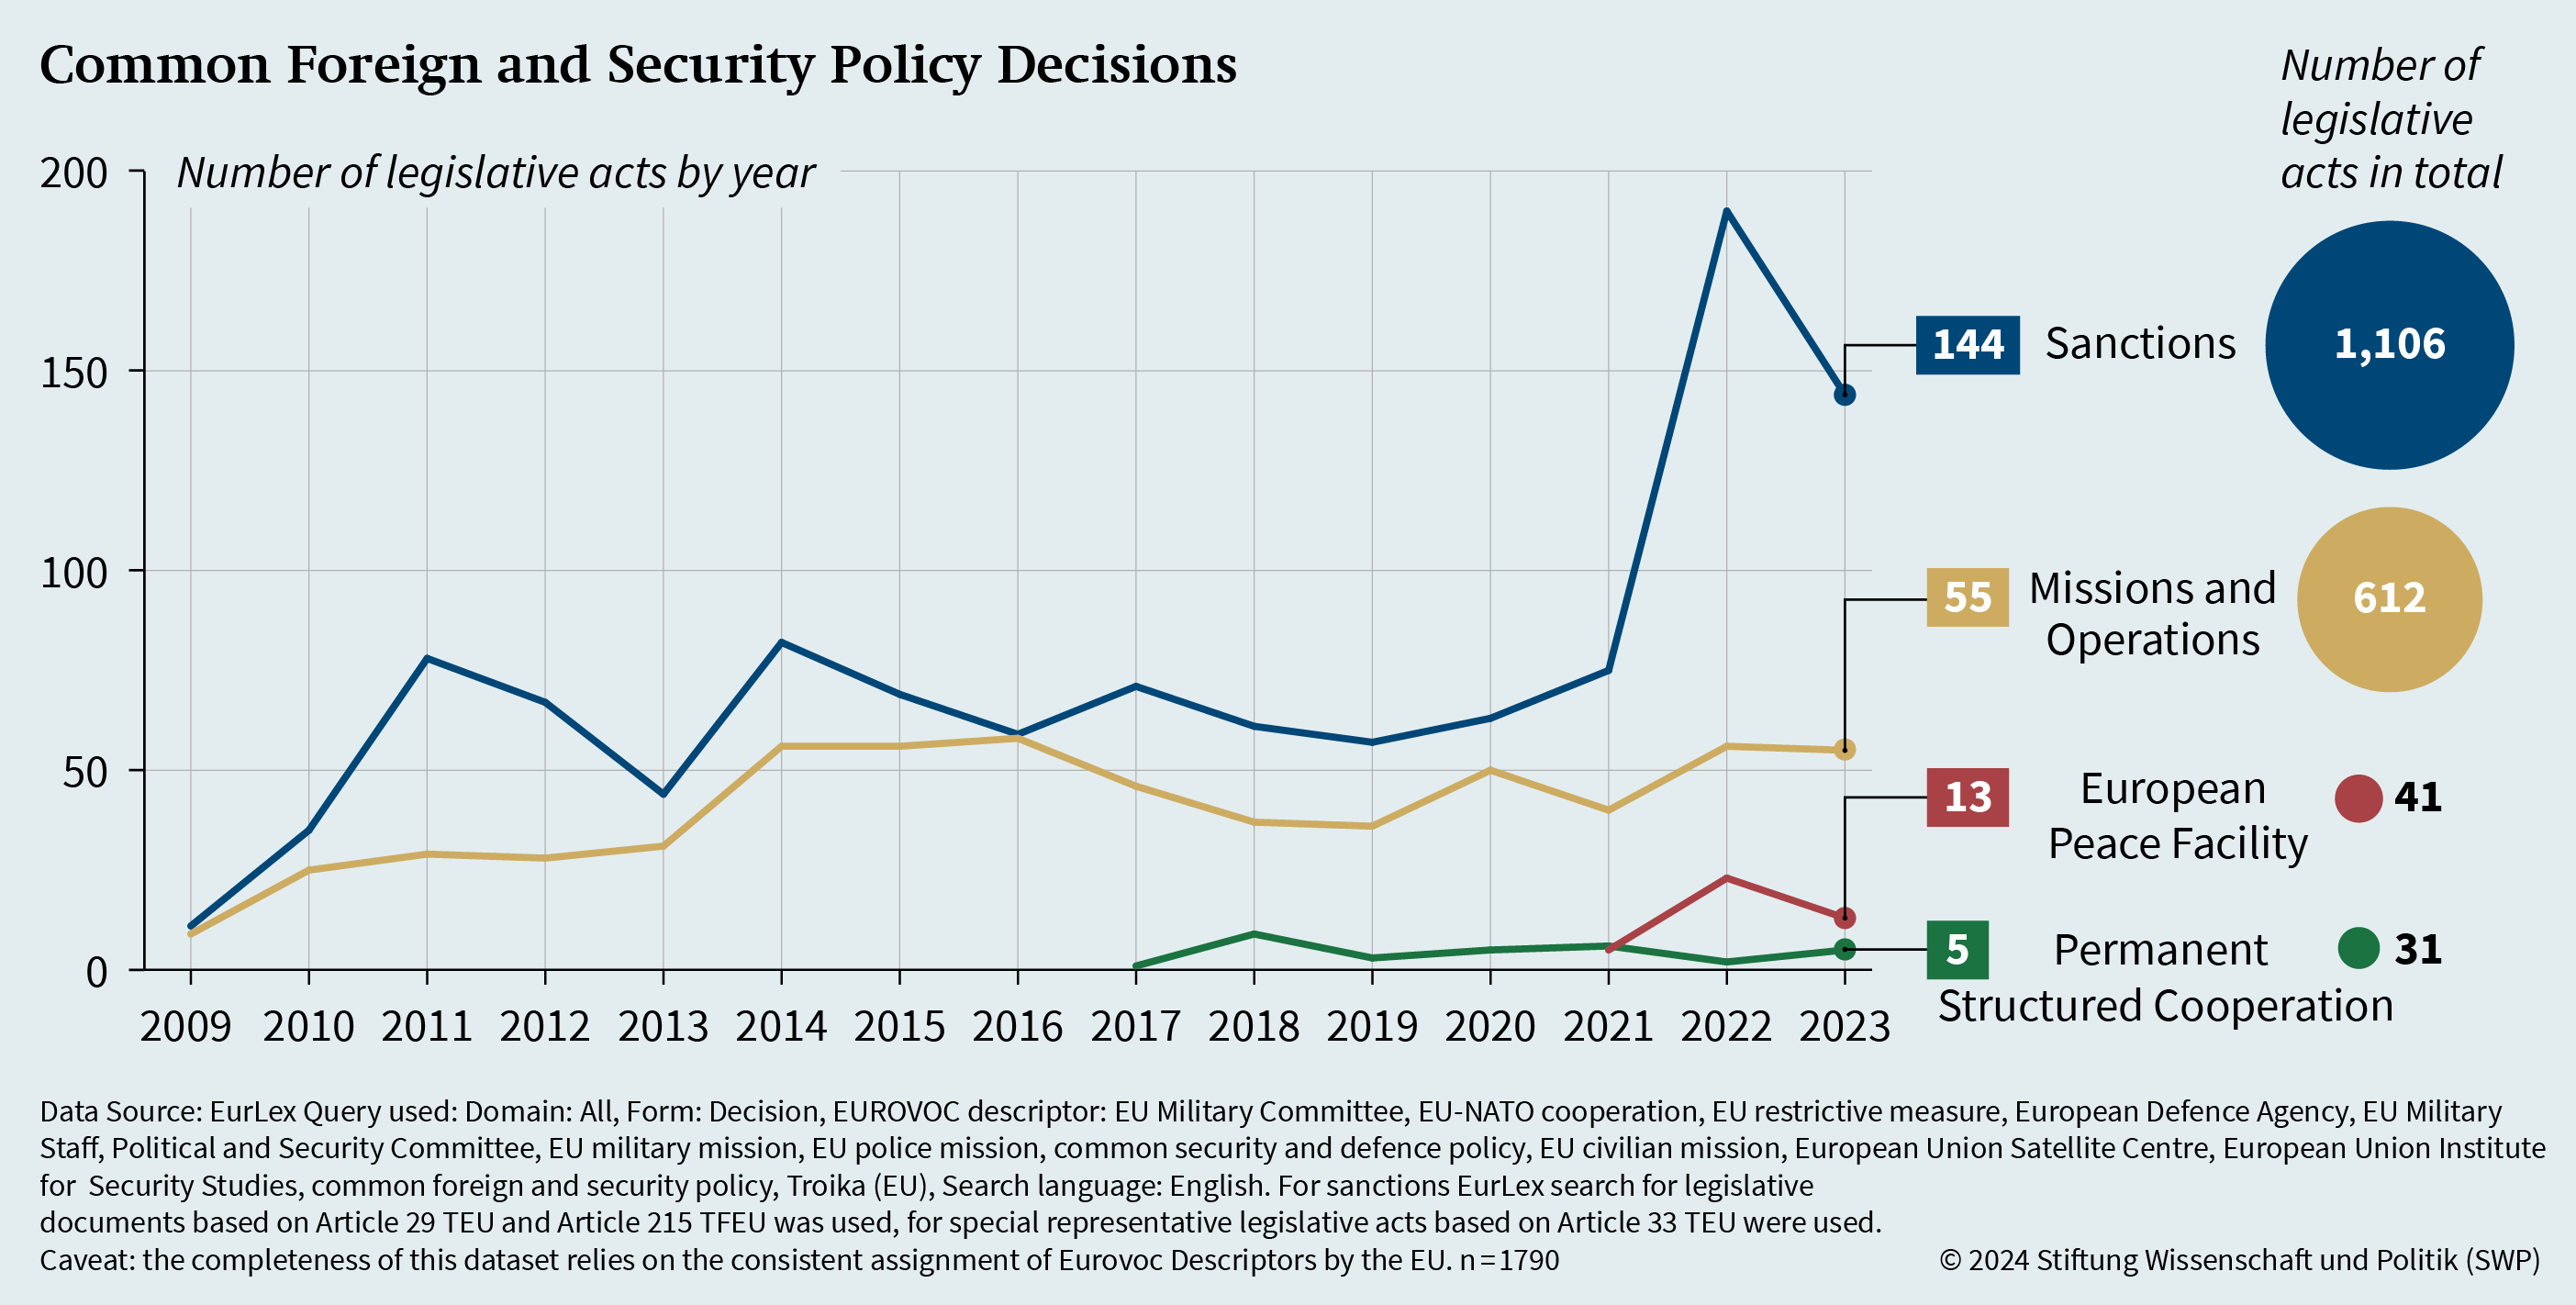 Figure 1: Common Foreign and Security Policy Decisions